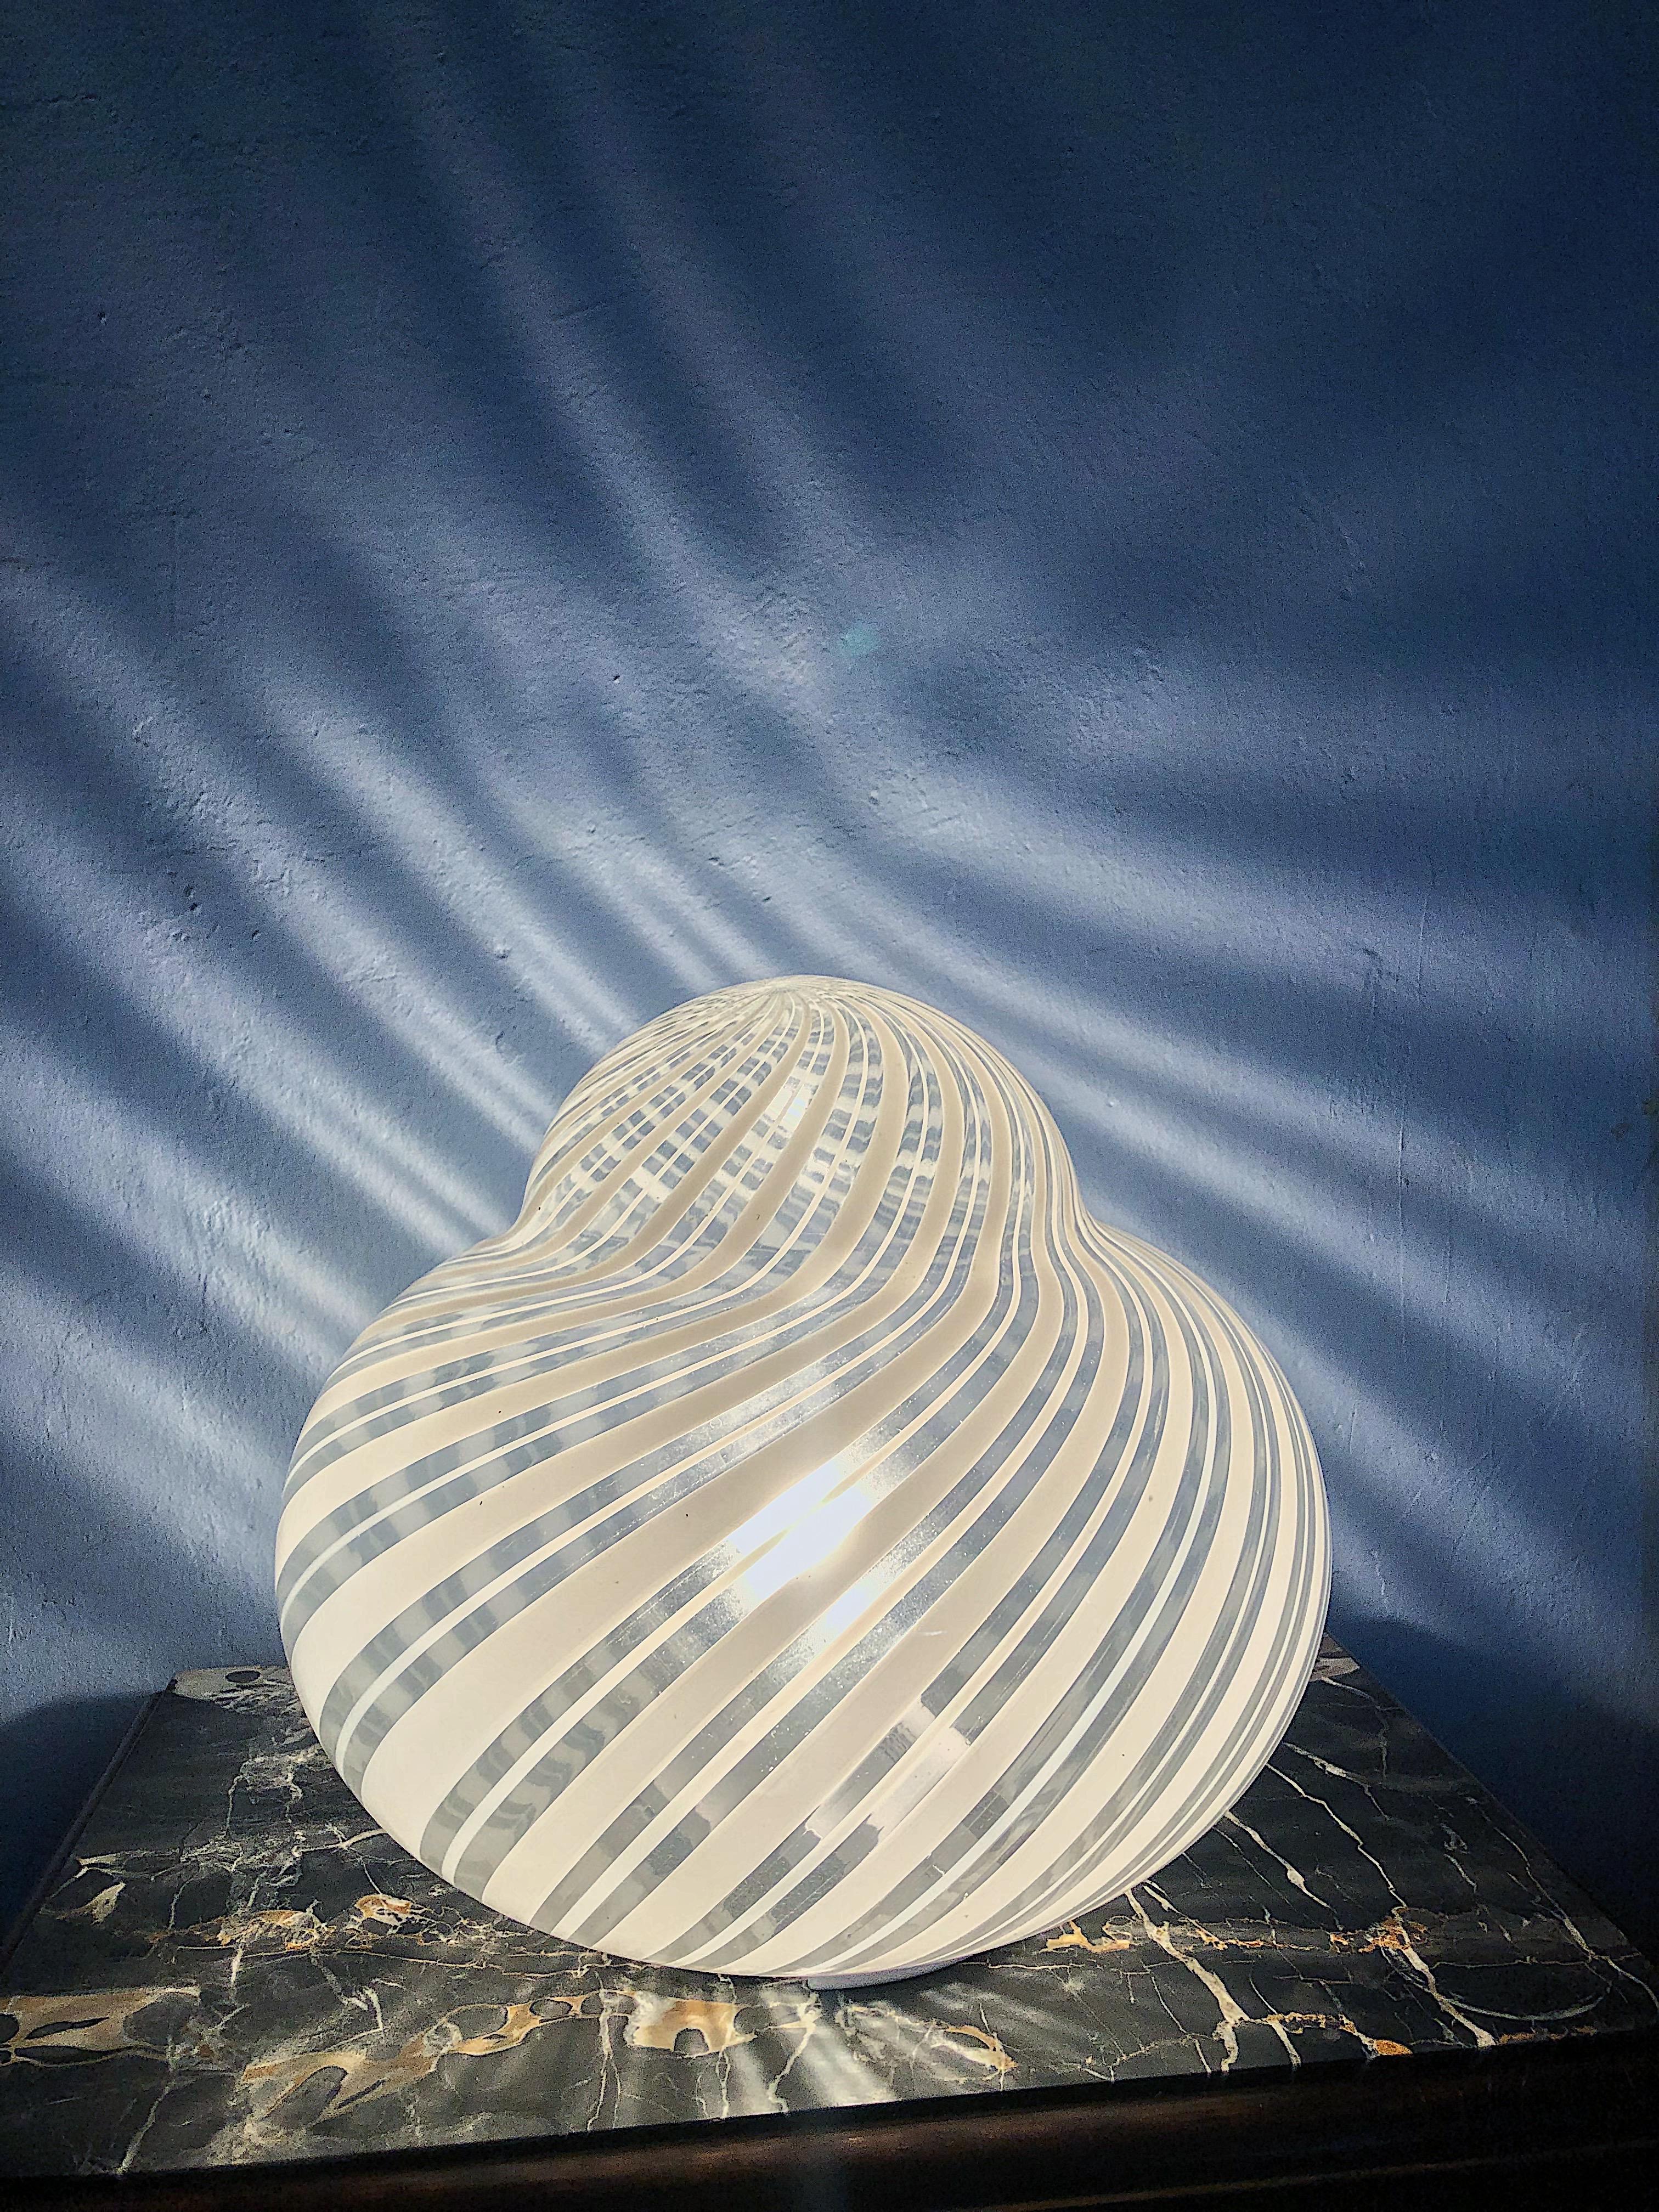 Large white Murano glass swirl lamp. Suitable for table or as a floor light.
Creator: F.FABBIAN Murano

Dimensions: Height: 30 cm Diameter: 33 cm
Materials and Techniques: Metal, Glass
Place of Origin: Italy
Period: 1970-1980
Condition: Mint